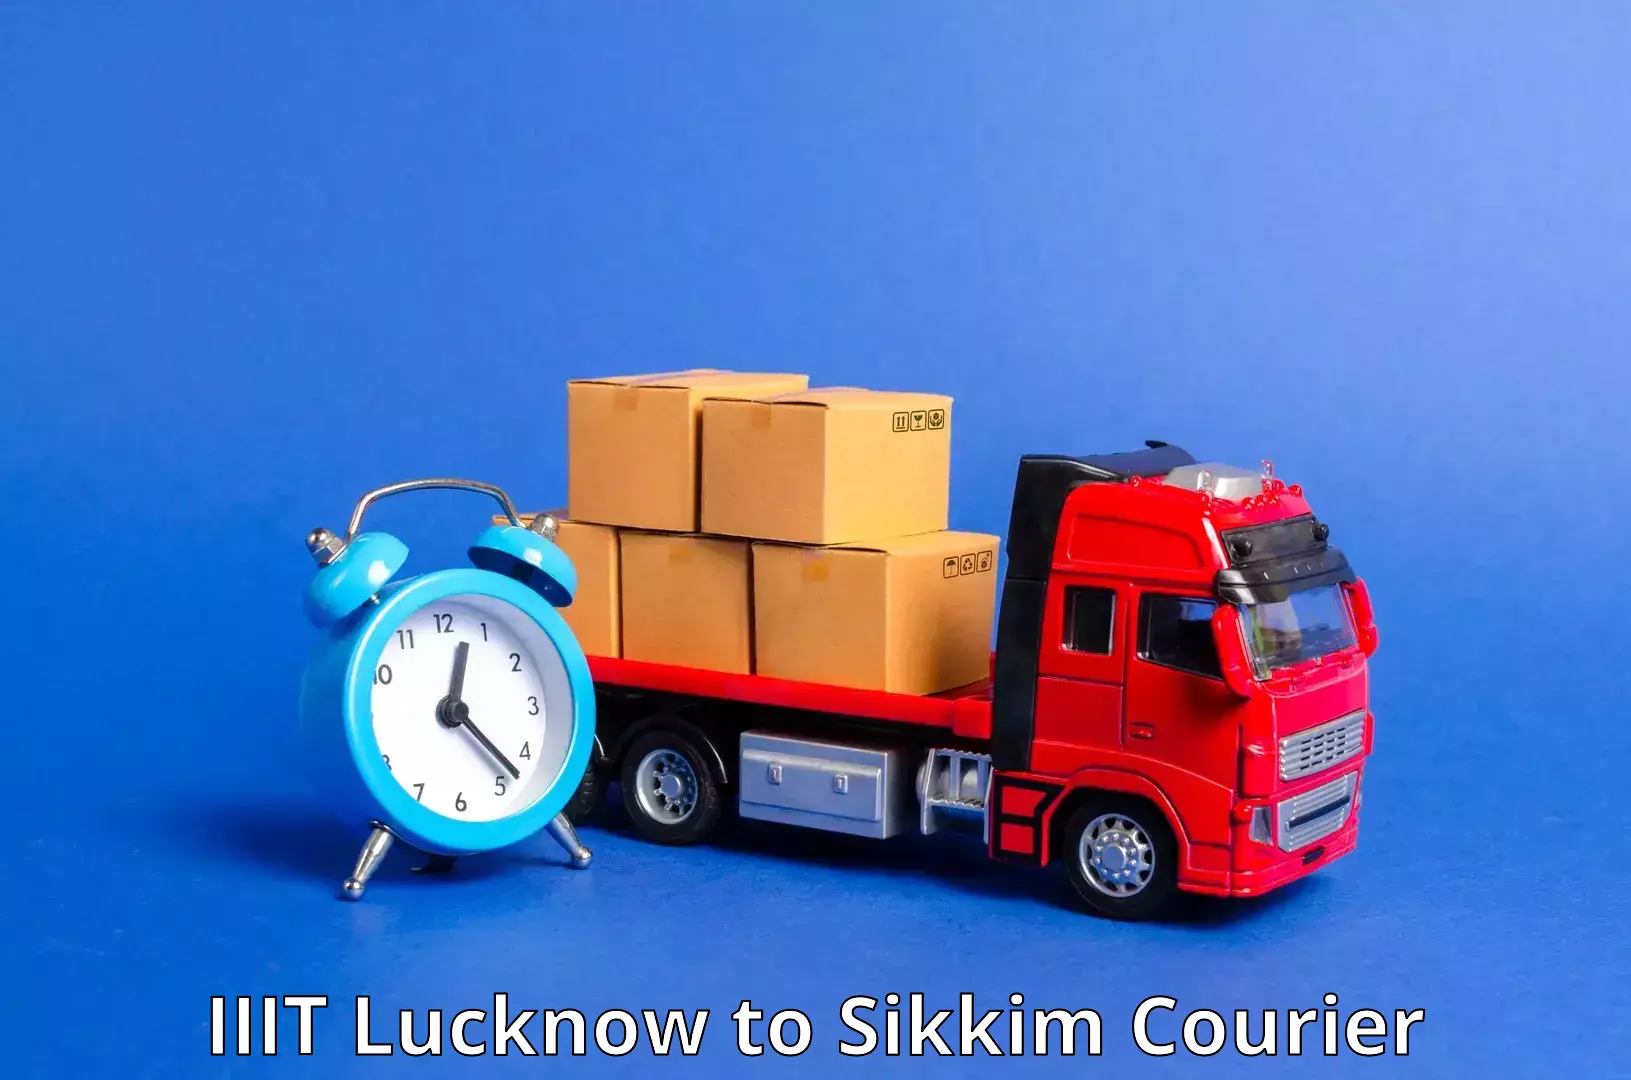 Customizable shipping options IIIT Lucknow to Pelling